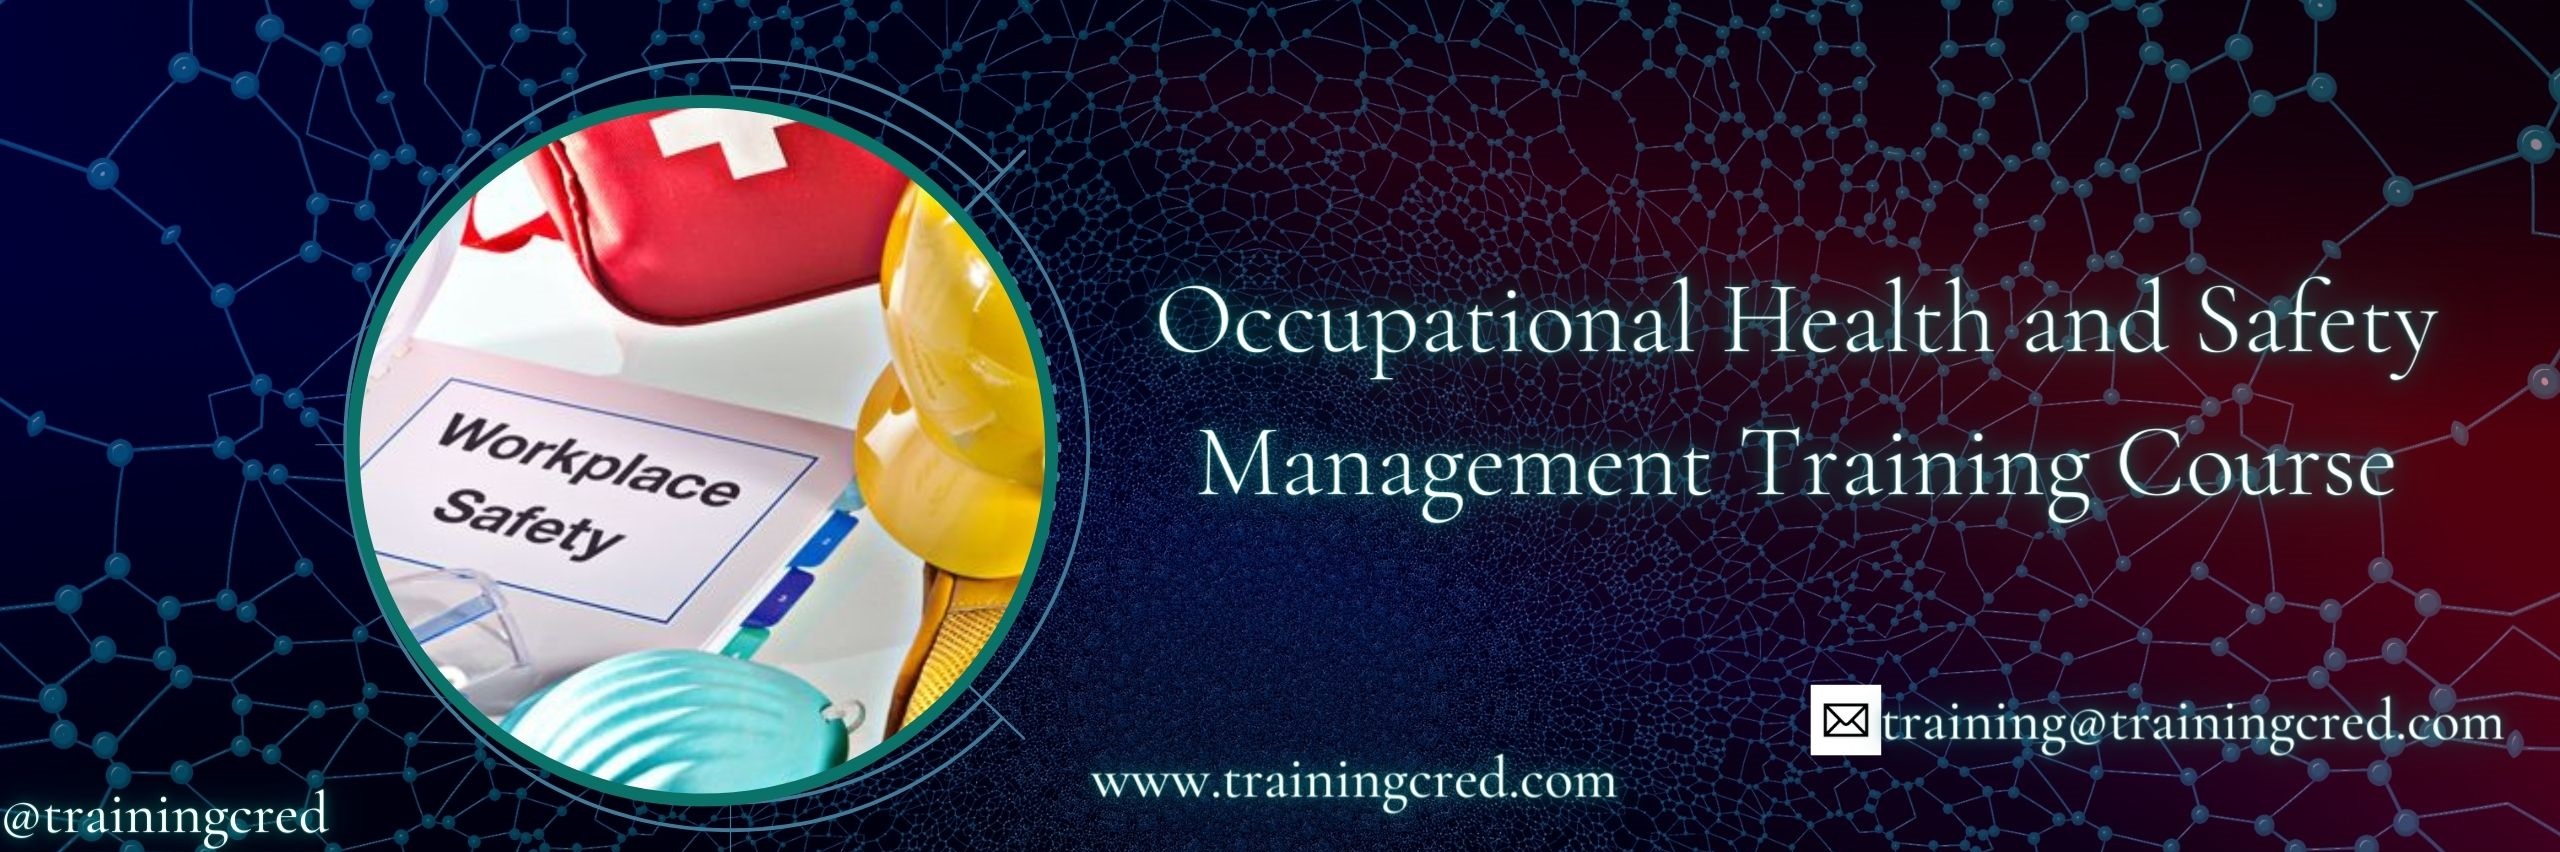 Occupational Health and Safety Management Training